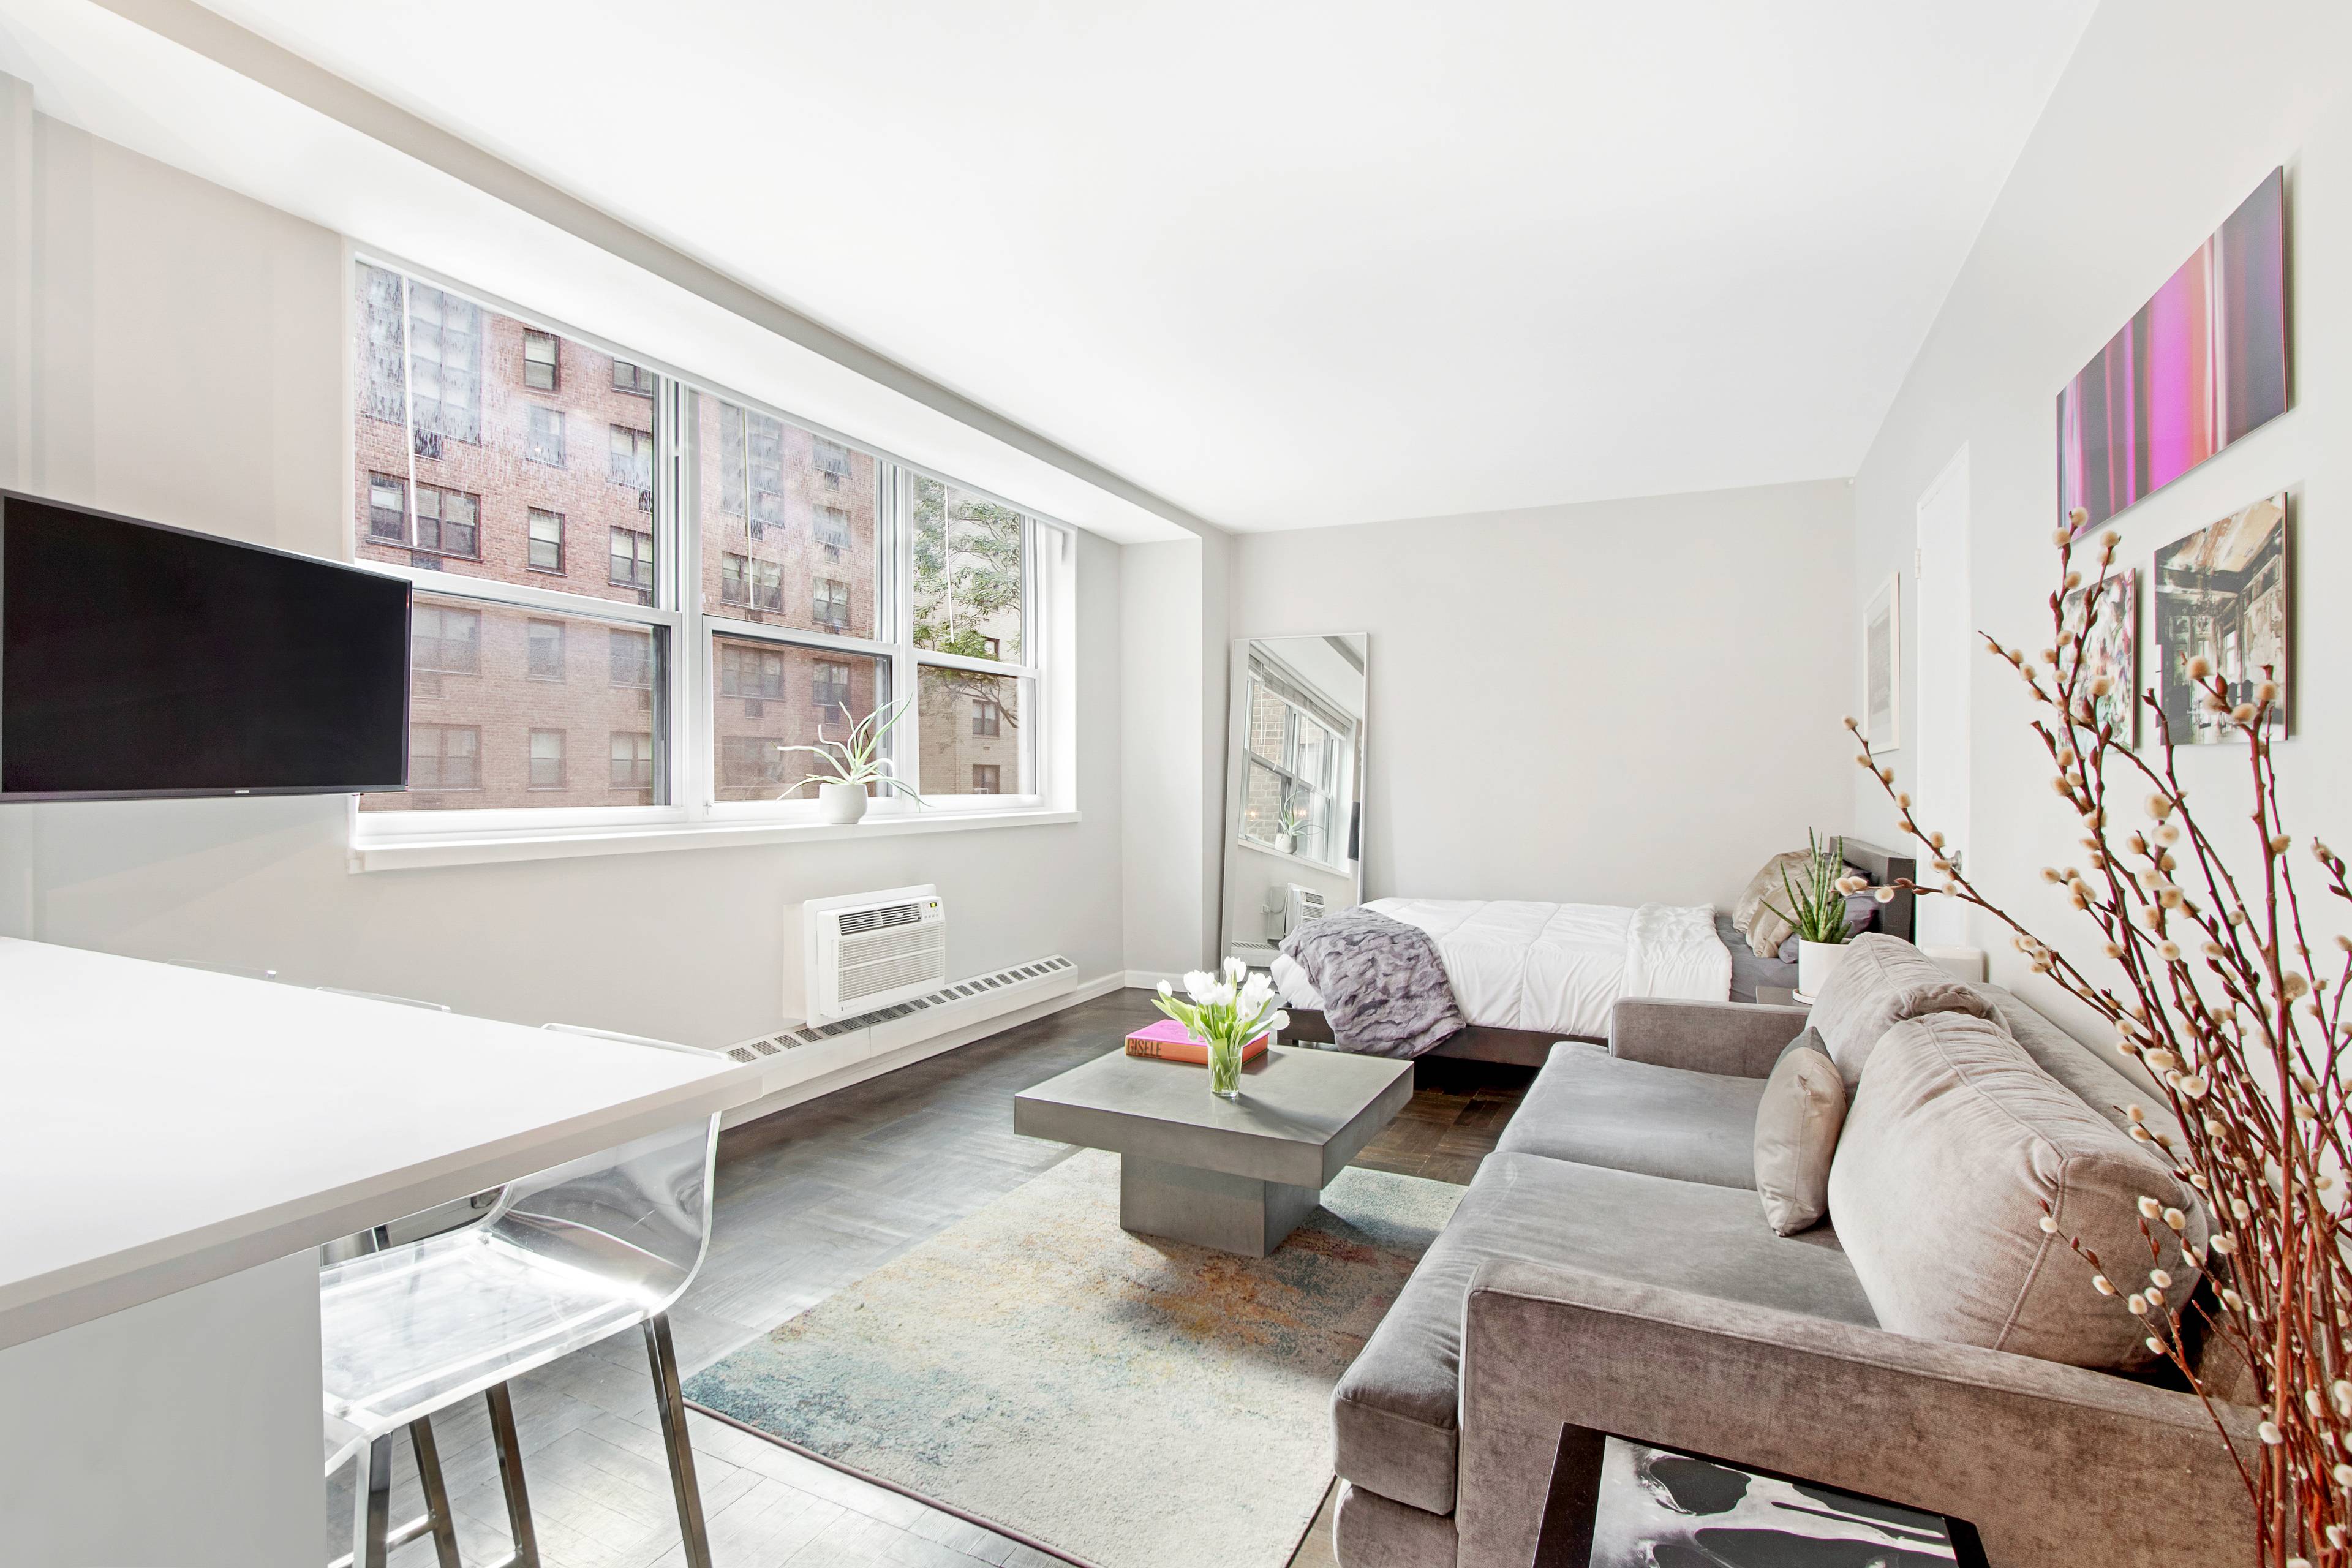 BEAUTIFULLY RENOVATED STUDIO- IN THE HEART OF GREENWICH VILLAGE